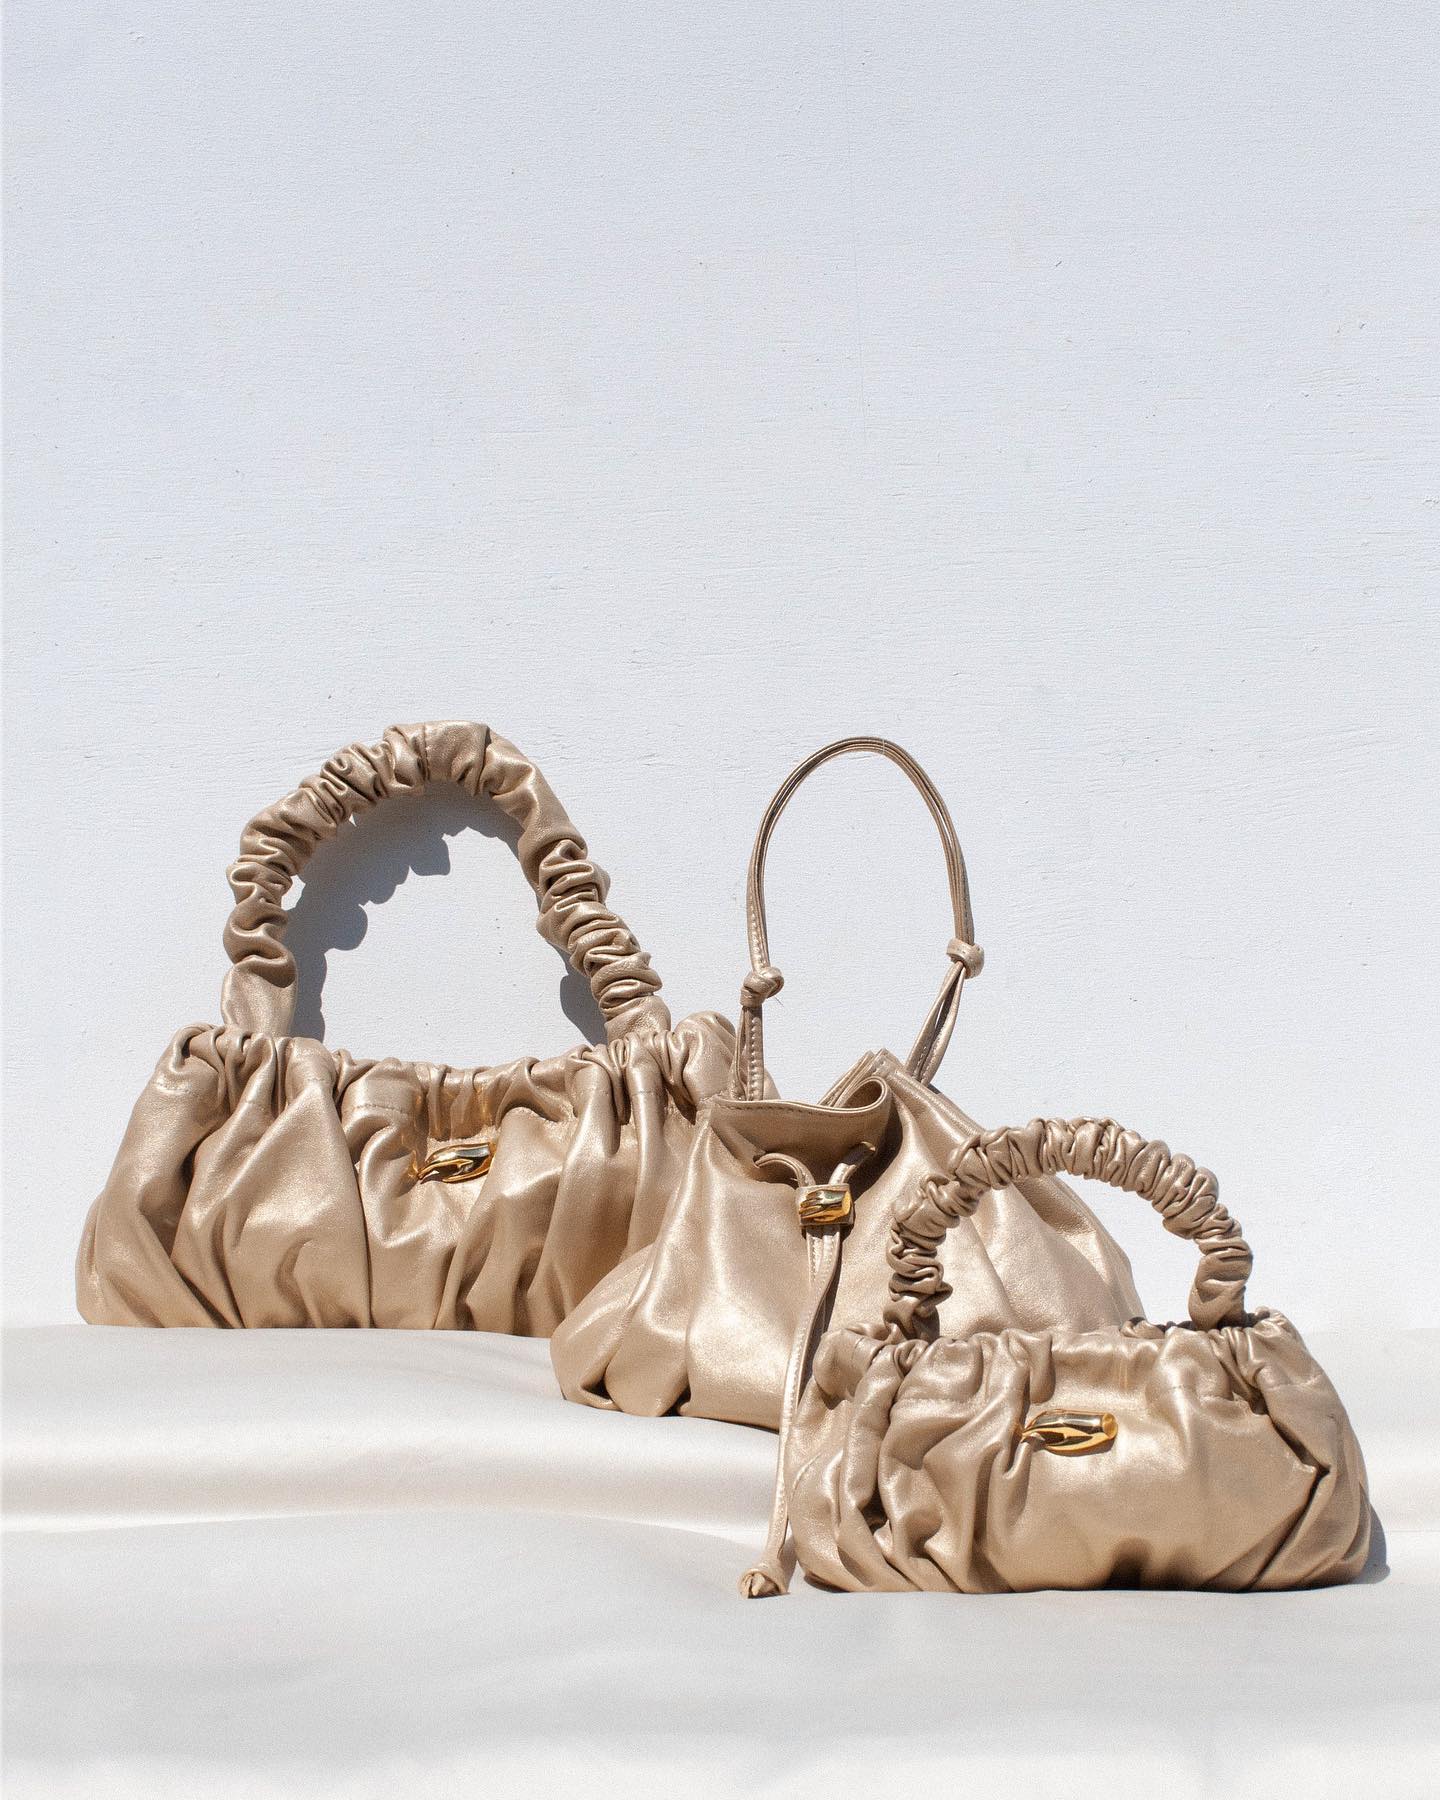 PIERRE GOLD LEATHER BAG